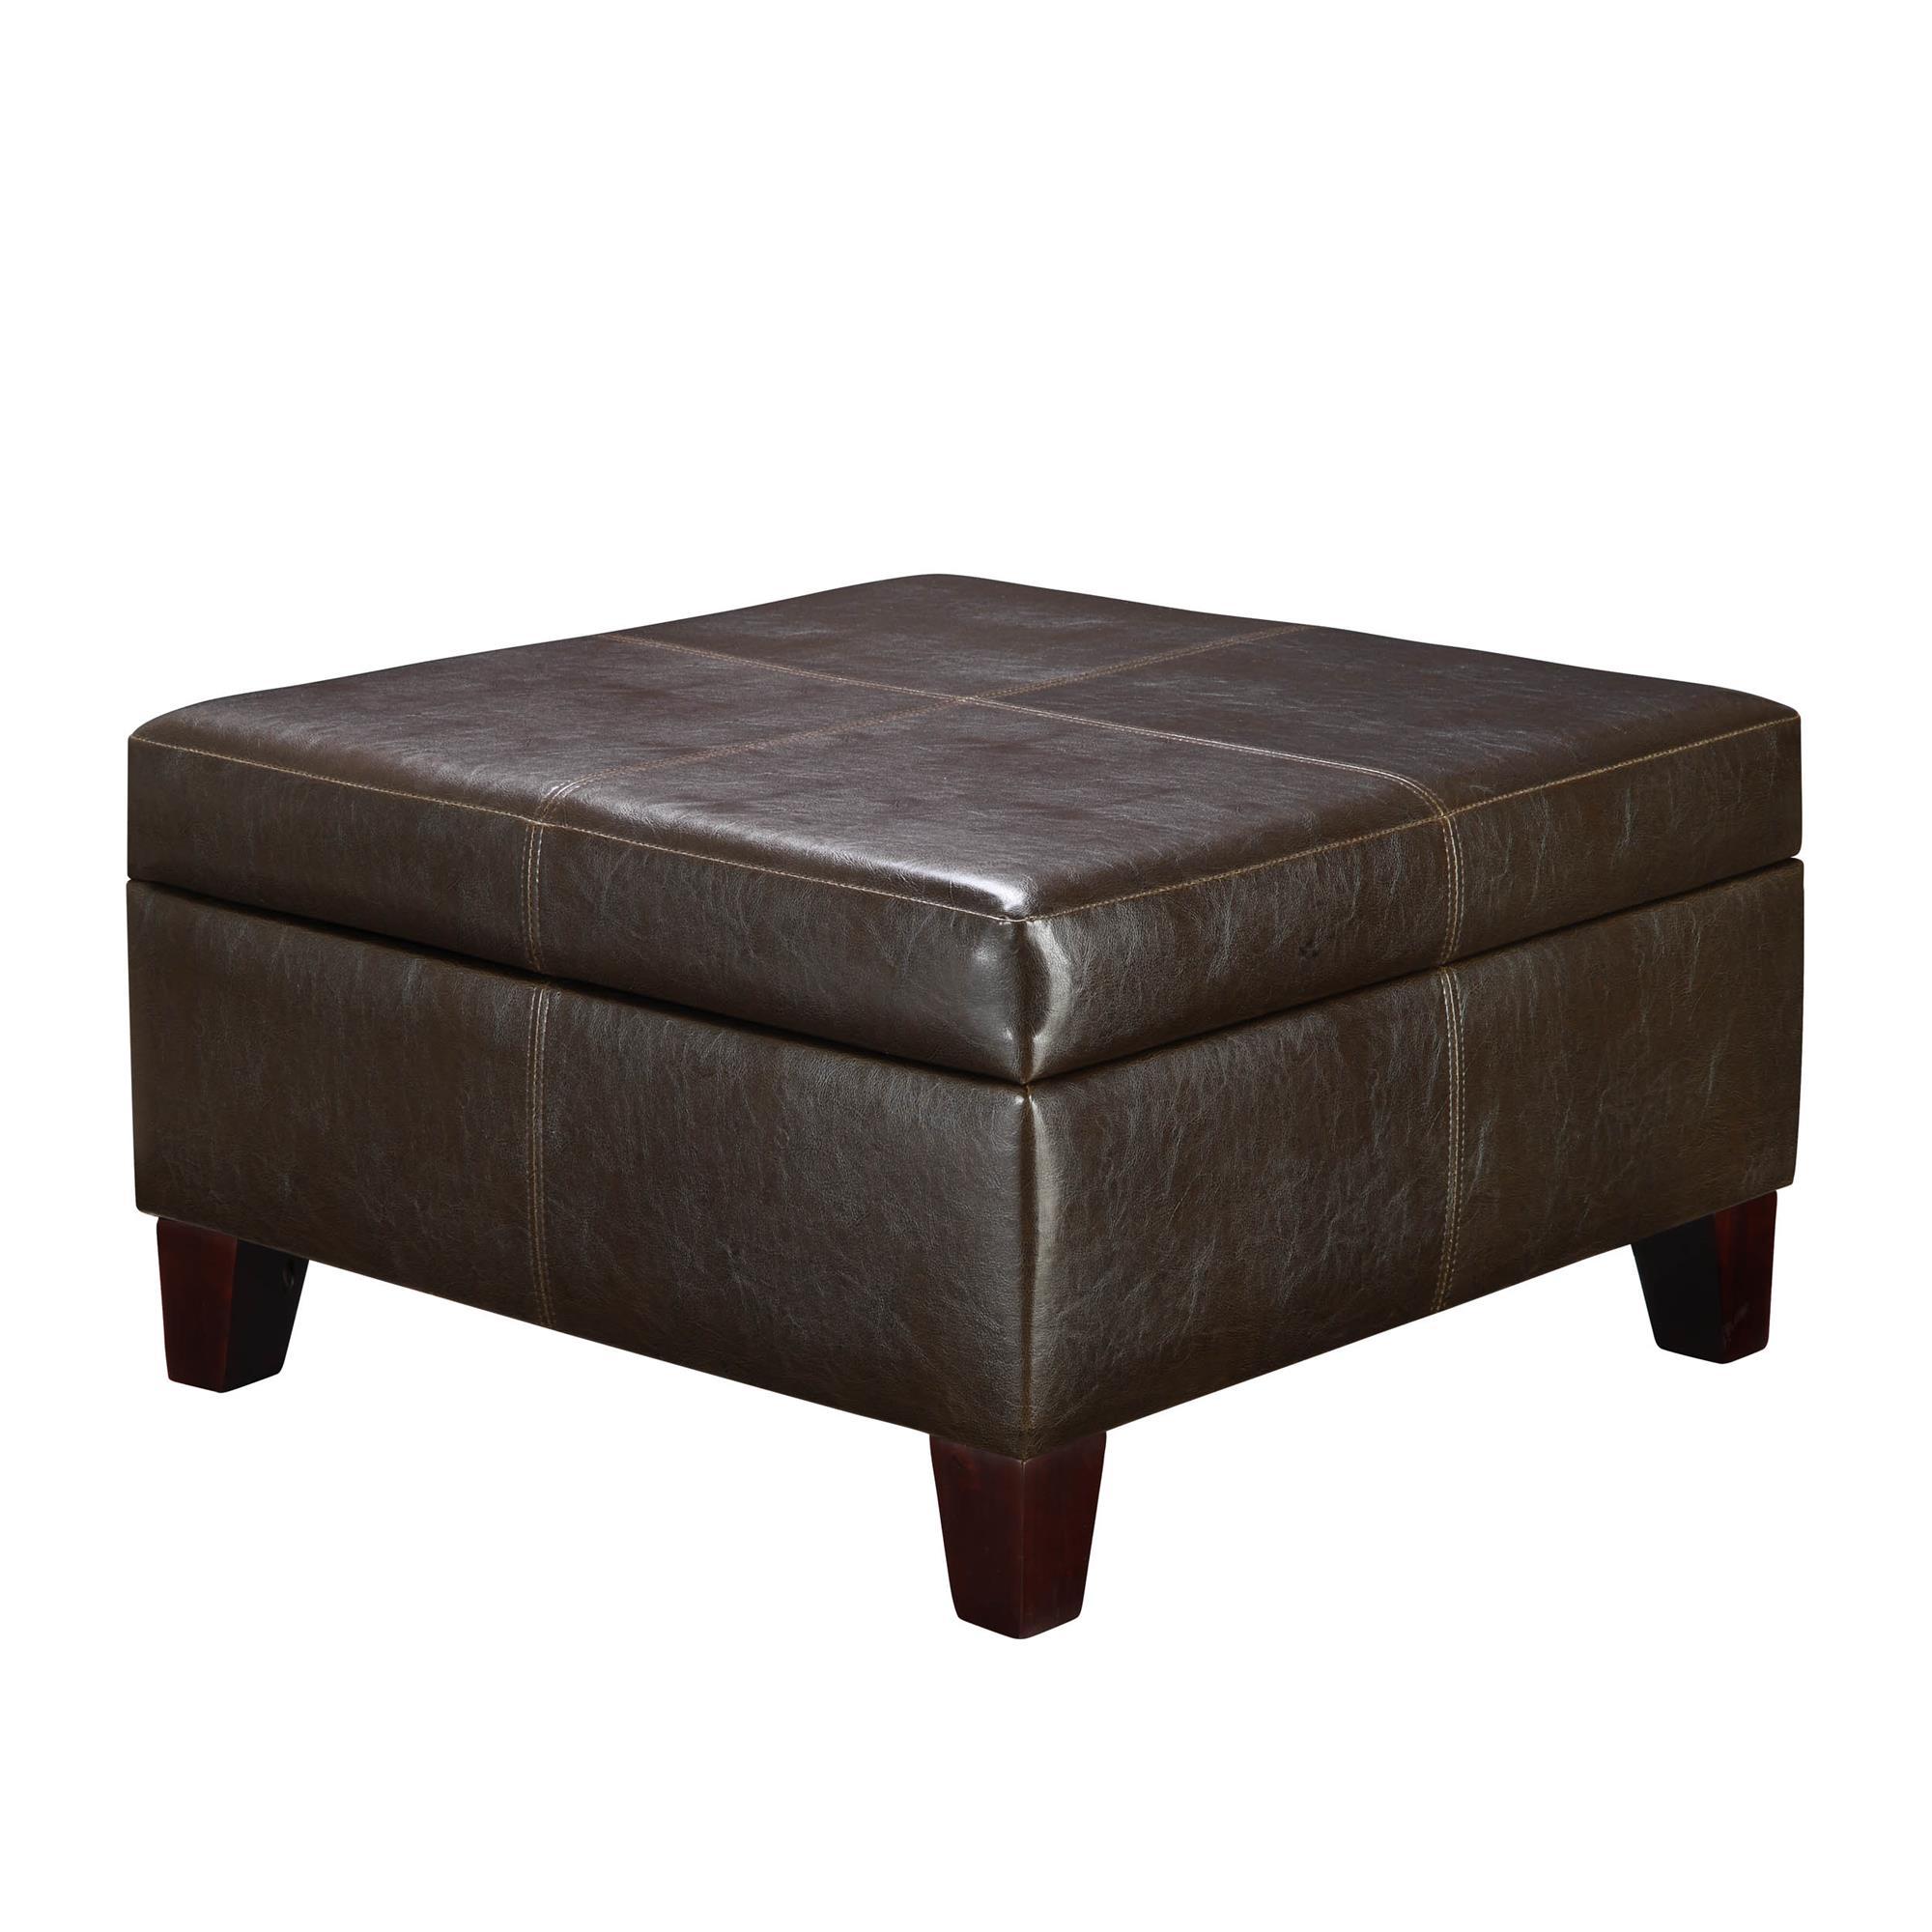 27in Dorel Living Woven Paths Square Storage Ottoman for $68.37 Shipped